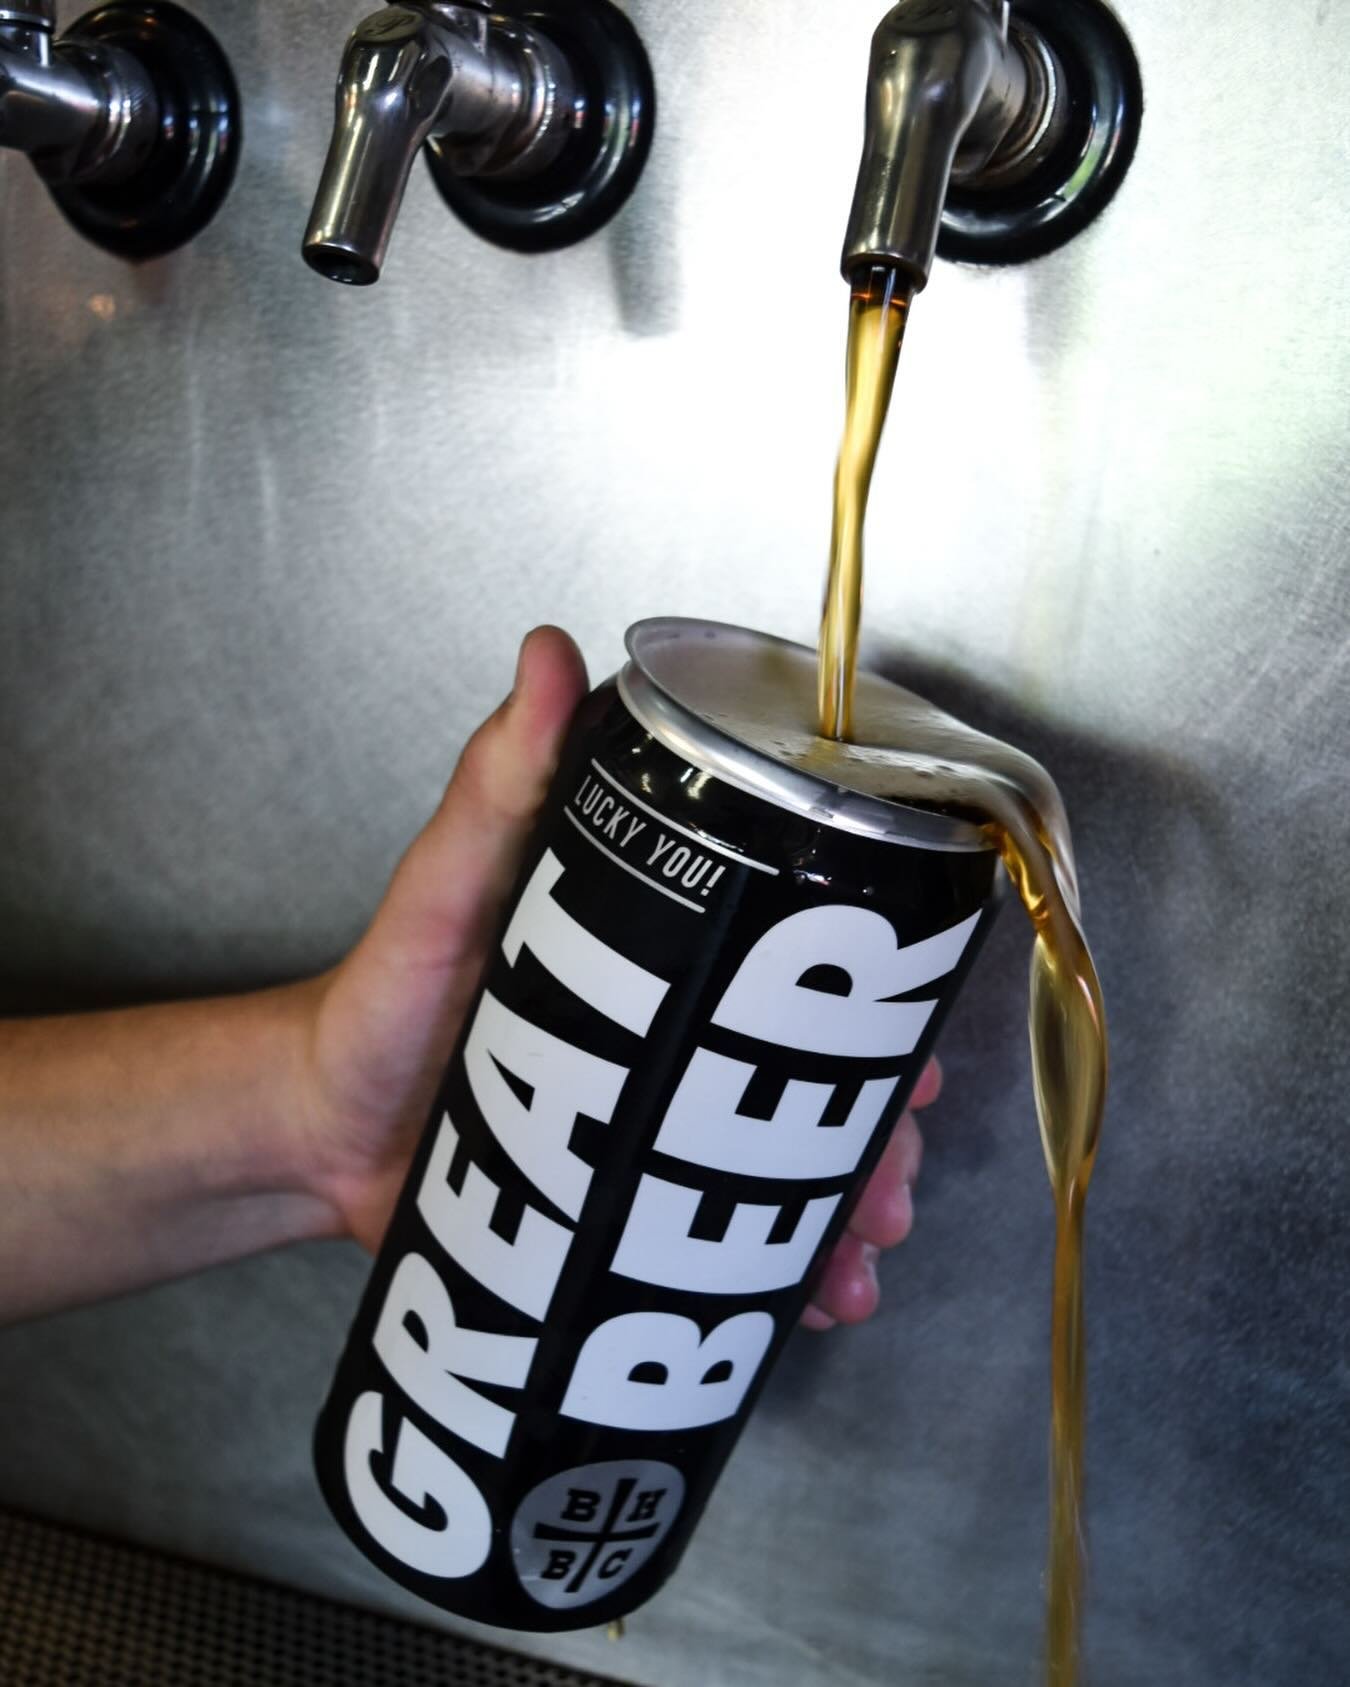 Get your weekend started right with a fresh Crowler from BarrelHouse Brewing Co.! 🍻

Whether you&rsquo;re heading to a BBQ, hitting the beach, or enjoying your day at home, our Crowlers are the perfect way to drink your favorite BarrelHouse brews on